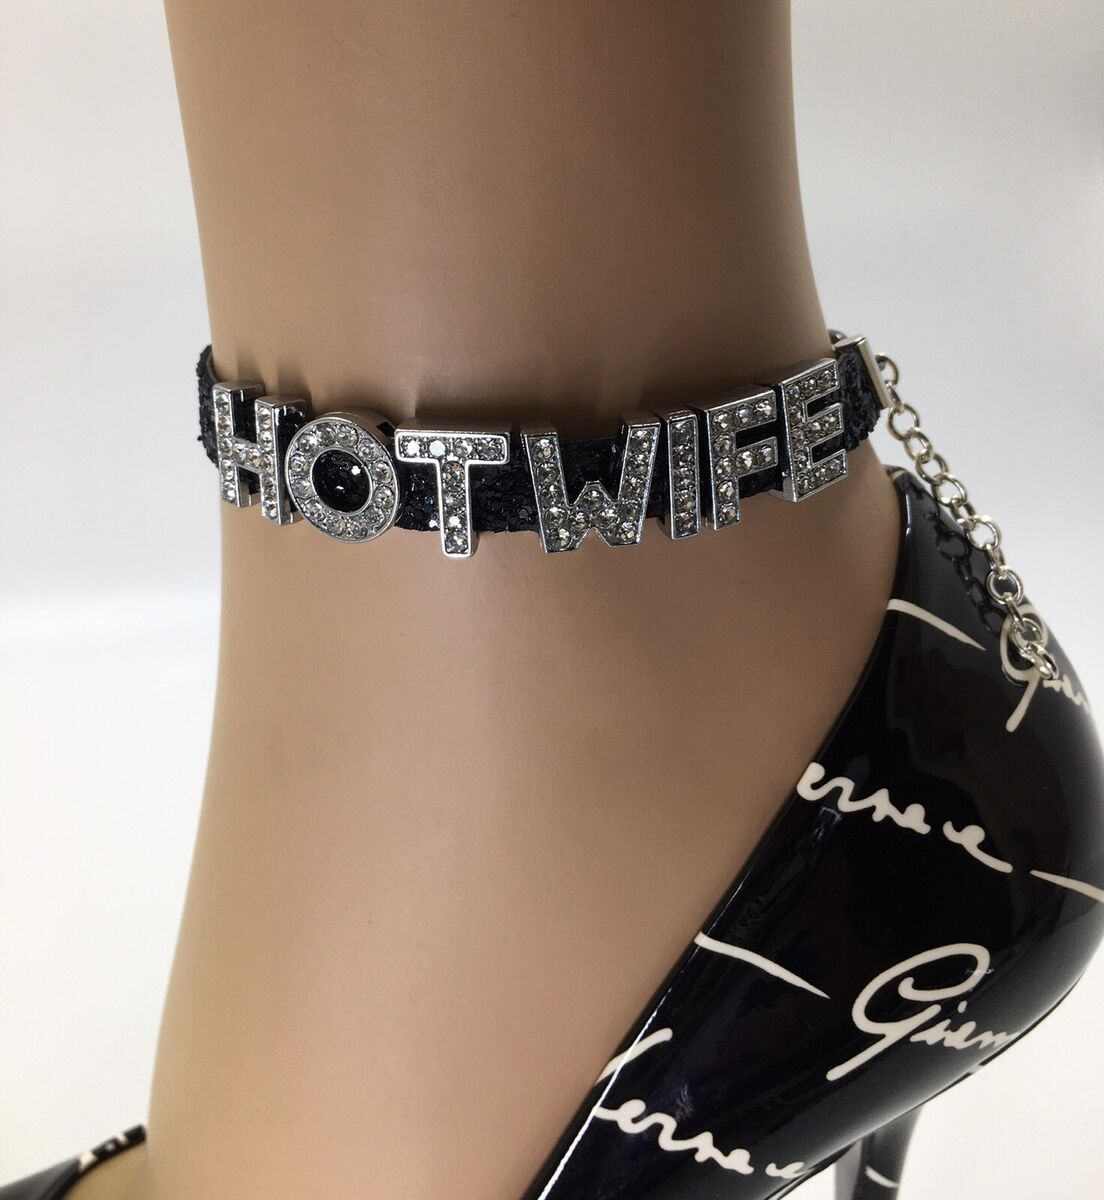 dinesh chand recommends What Is A Hotwife Bracelets